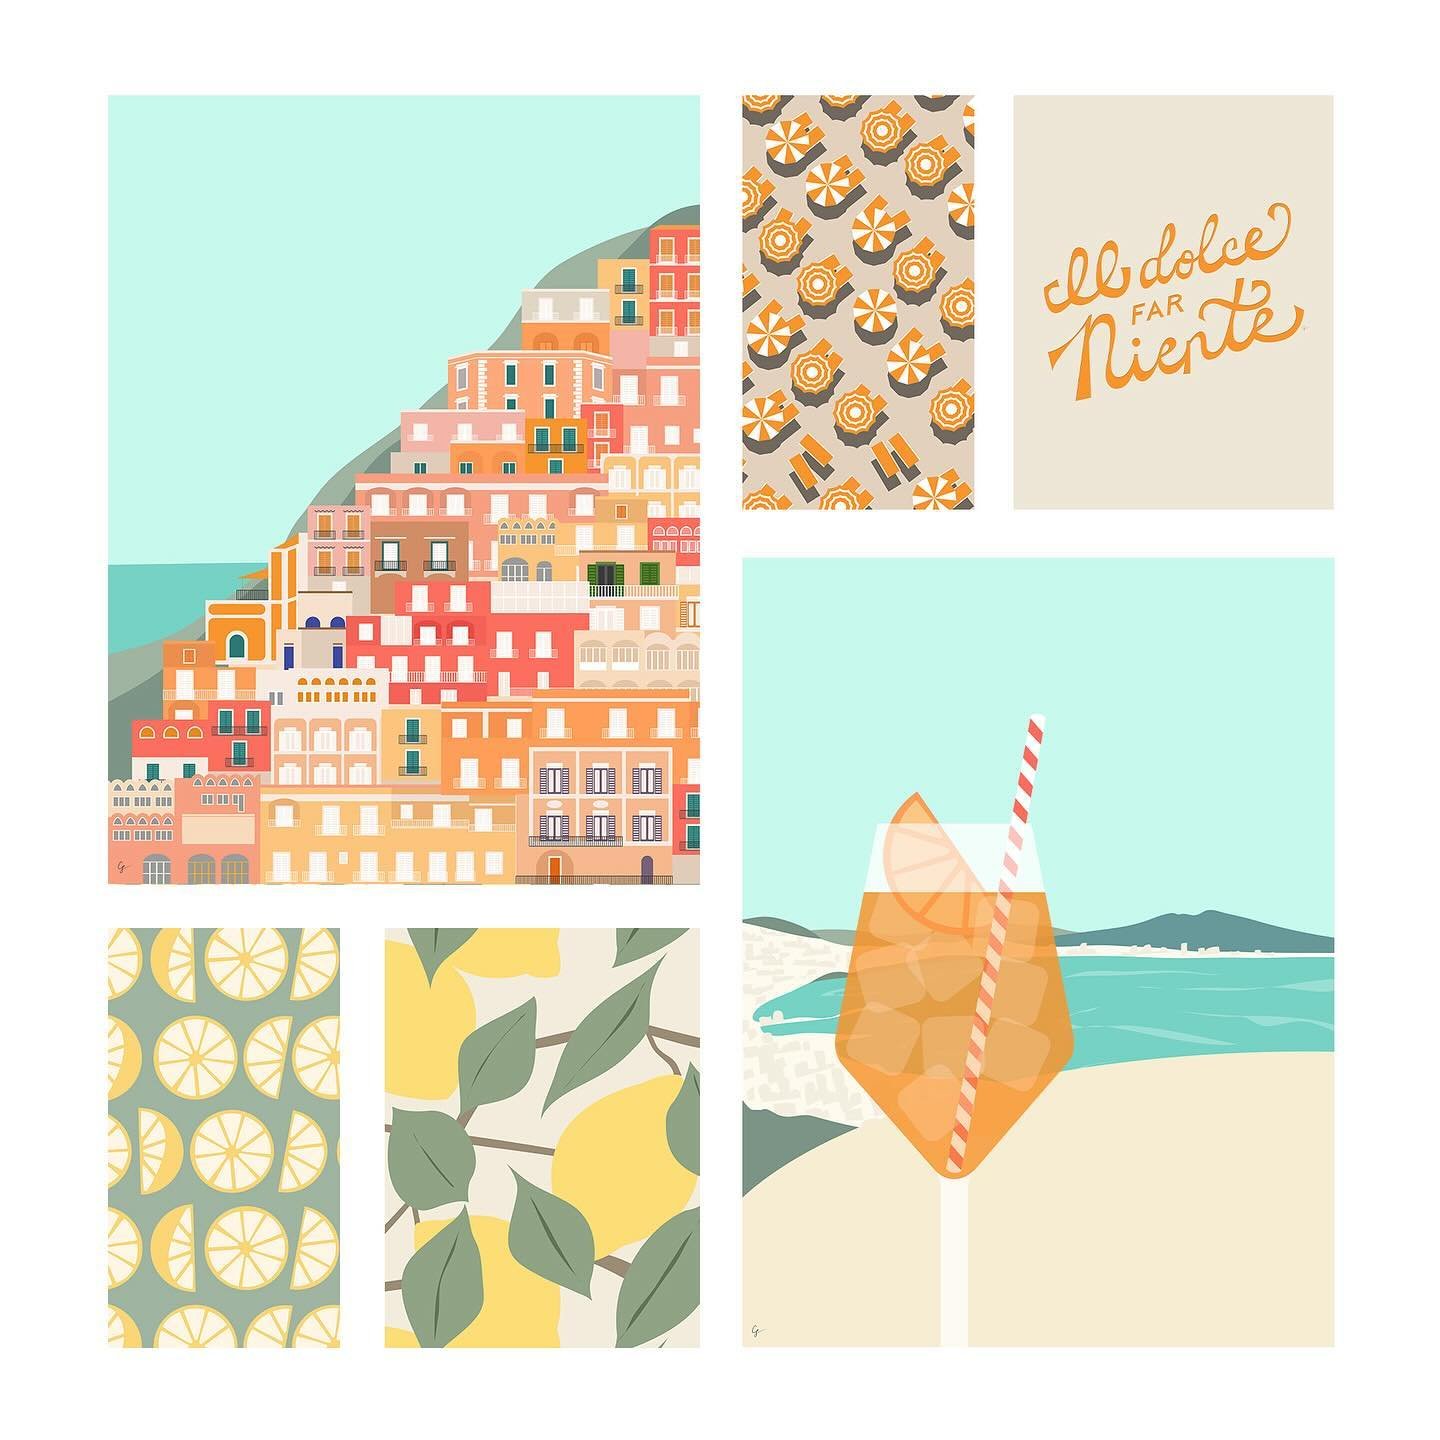 Collections [ On the Coast of Italy 🇮🇹 ] Swipe to see me with the largest 🍋 I&rsquo;ve ever seen in Italy!

#artlicensing #surfacepatterndesign #homedecor